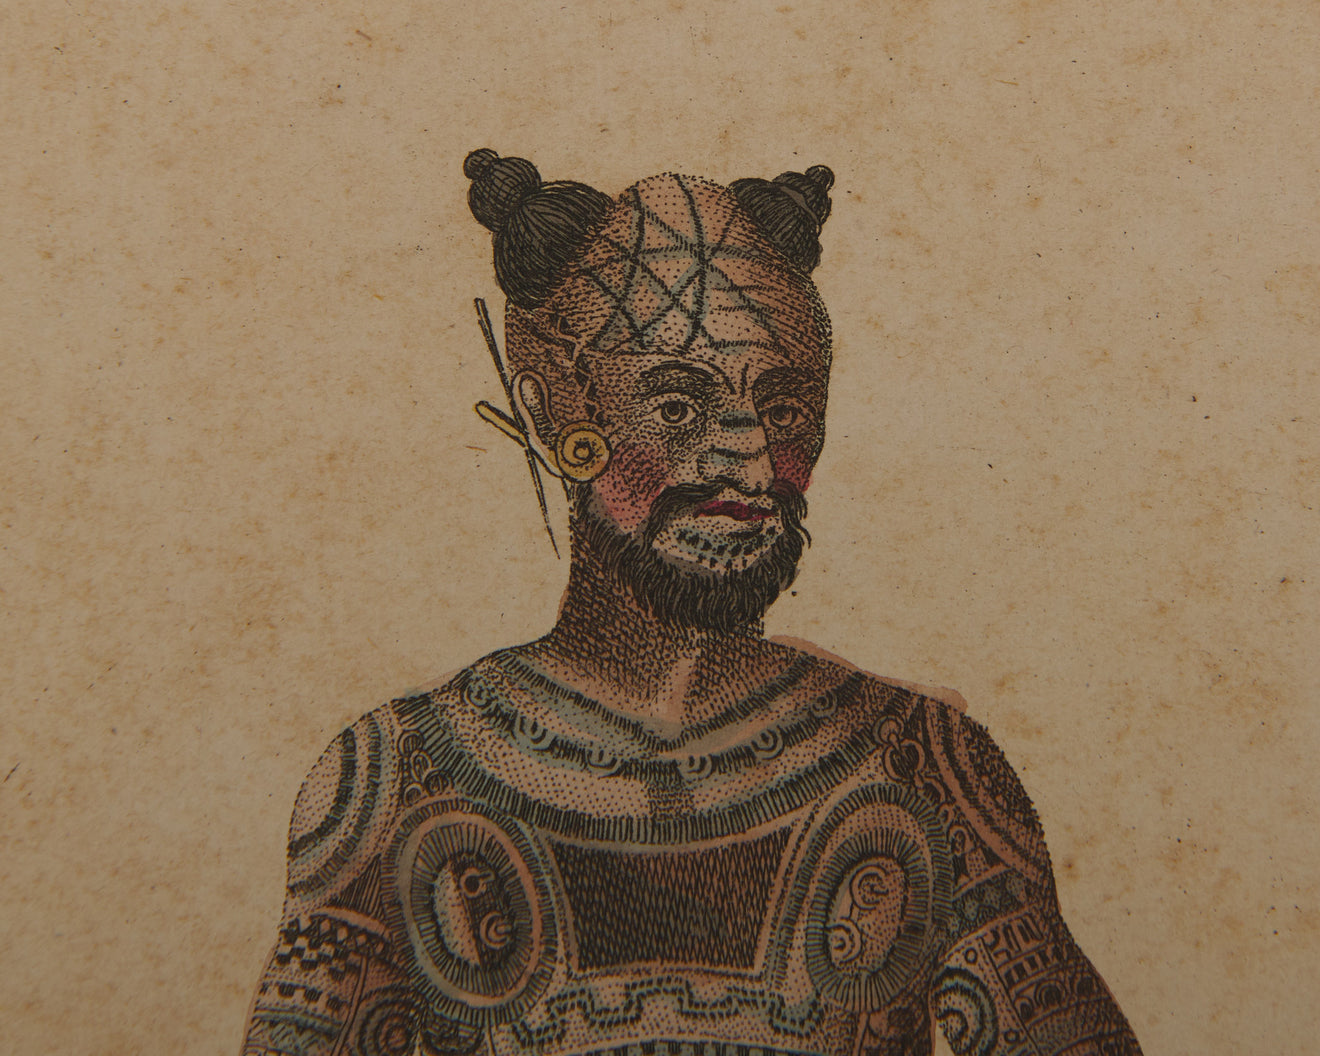 HAND COLORED ENGRAVINGS OF TATTOOED WARRIORS BY PAUL D STEWART